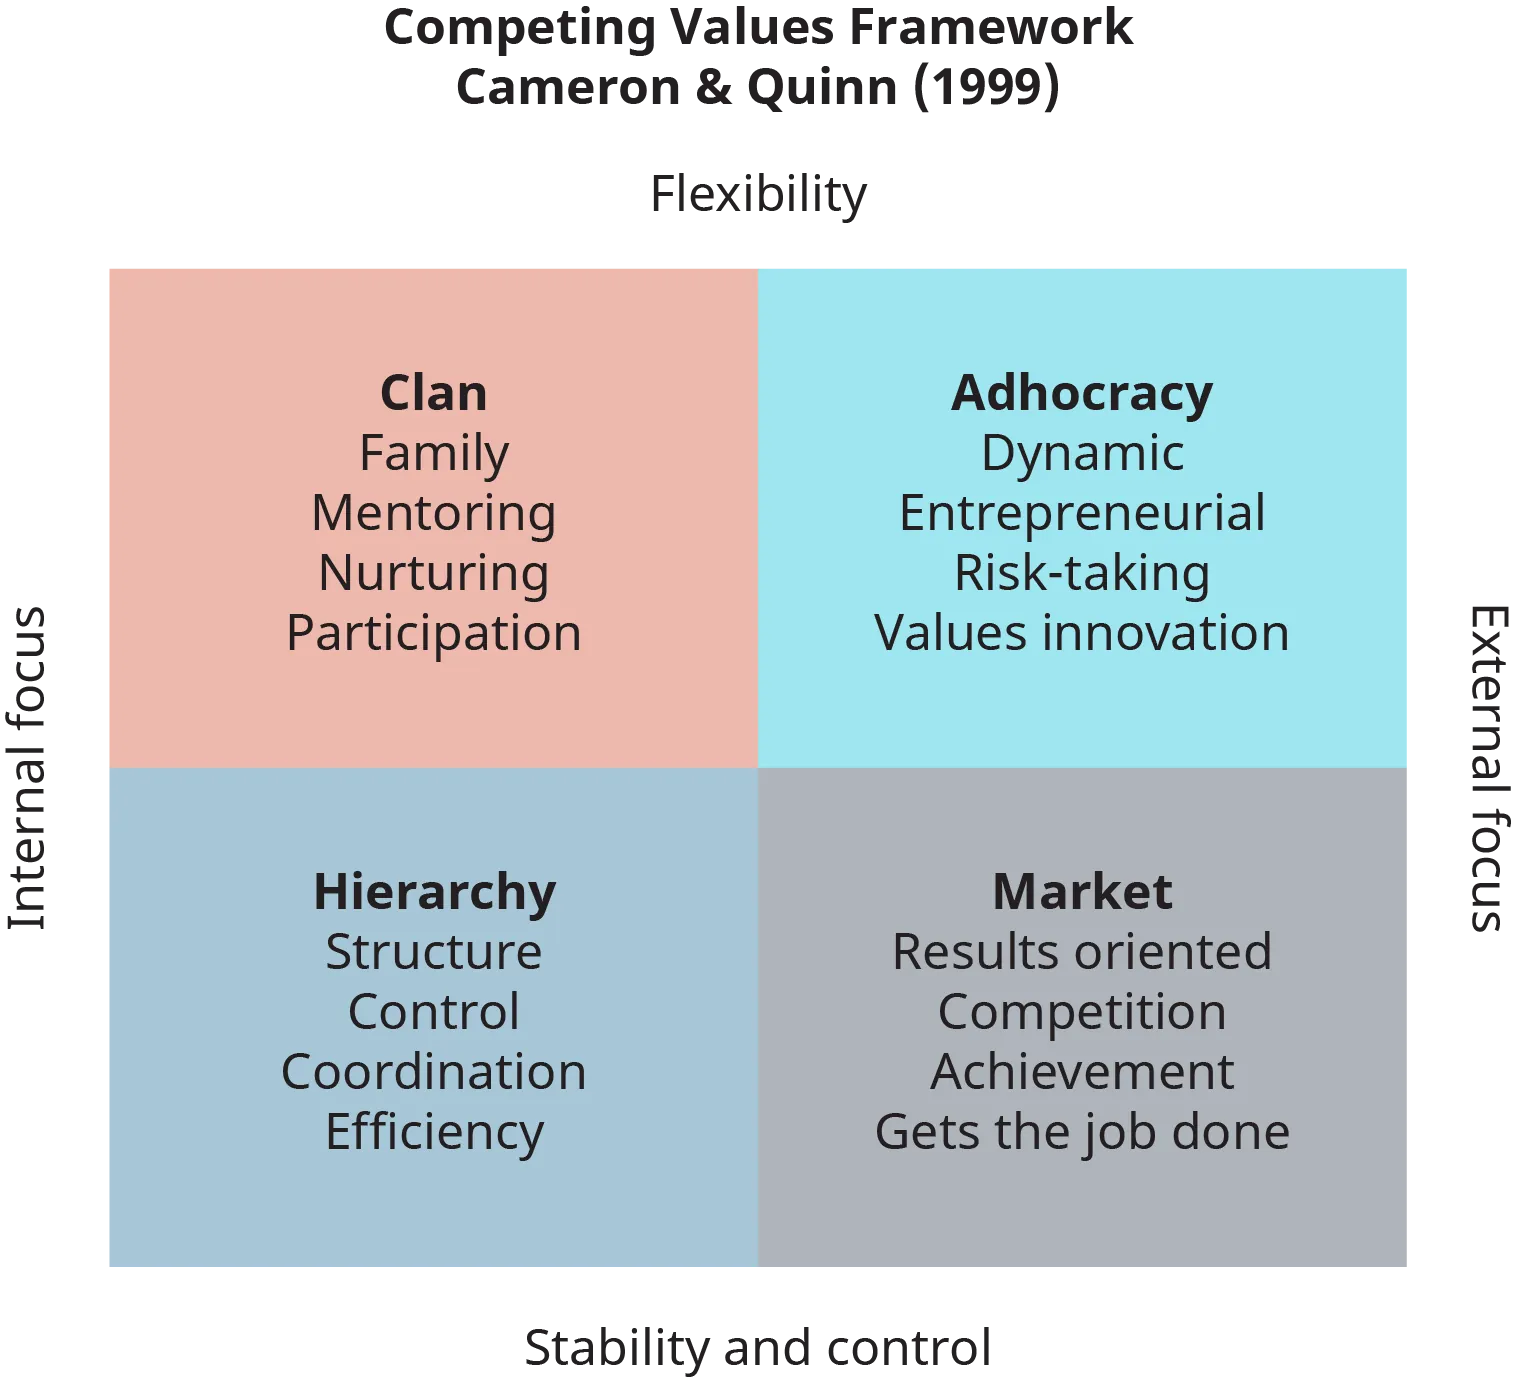 A diagram shows the Competing Values Framework for cultural assessment of organizations, as given by Cameron and Quinn in 1999.